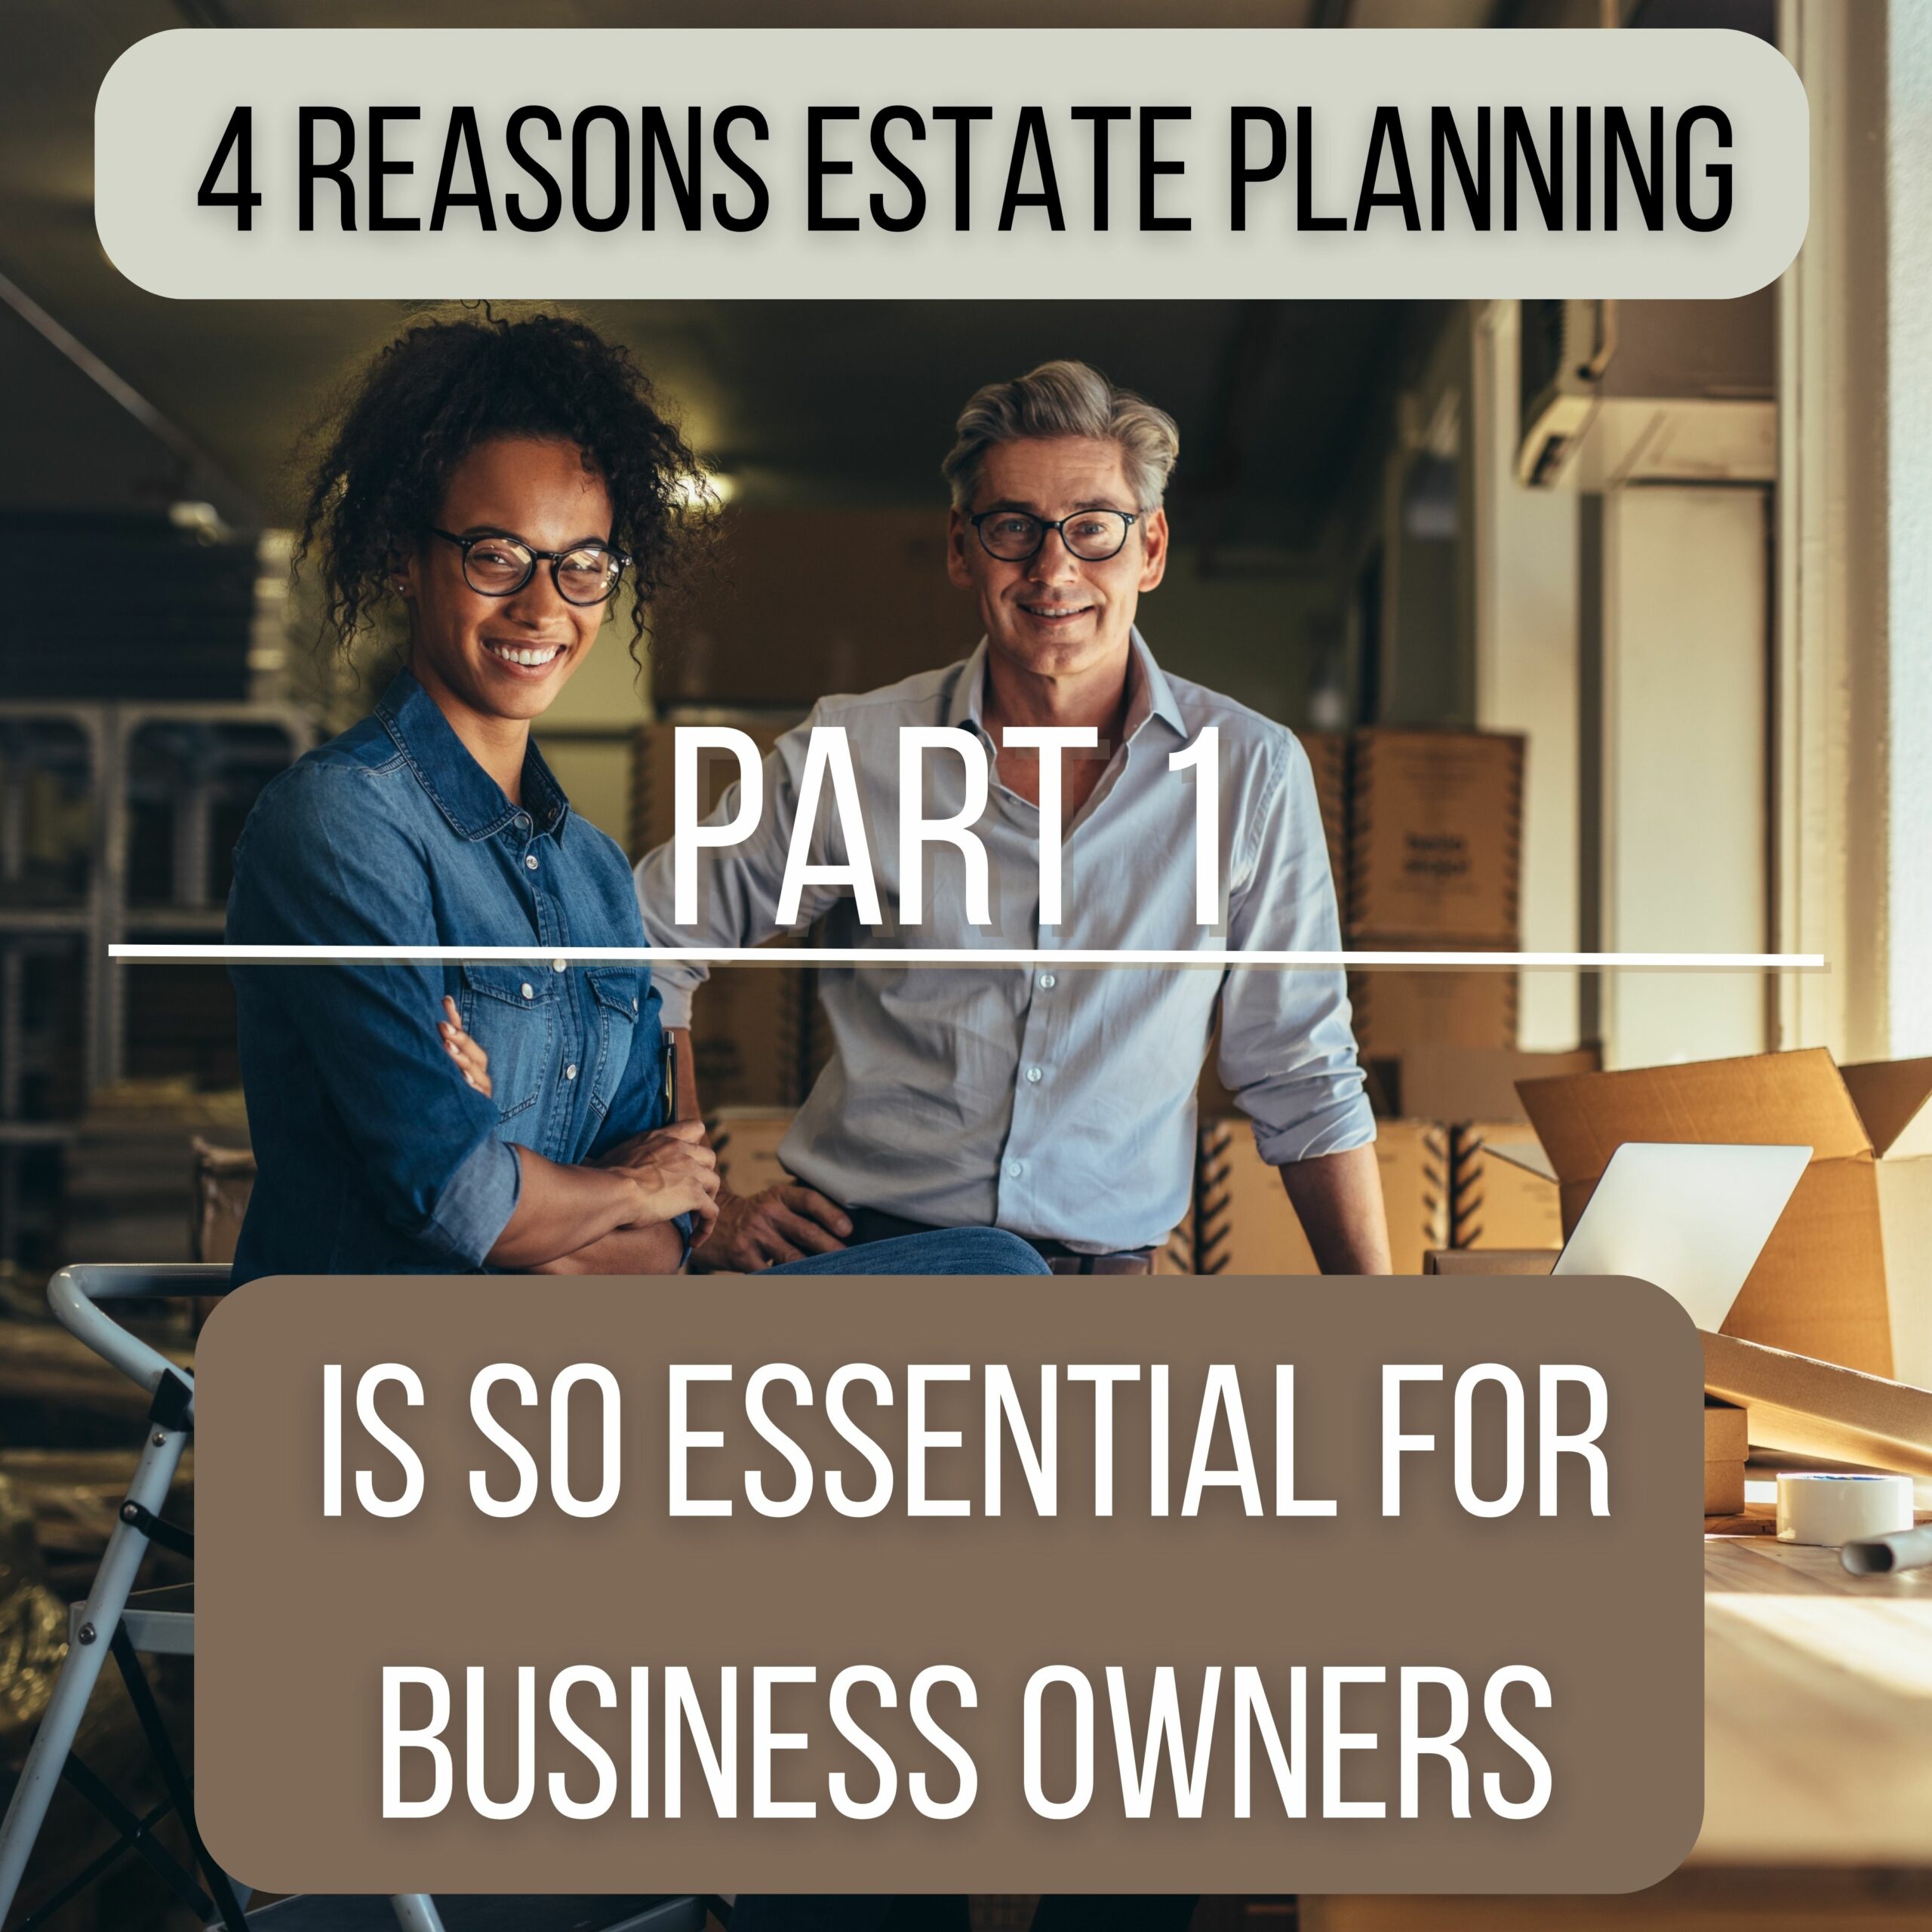 4 Reasons Estate Planning is so Essential for Business Owners – Part 1